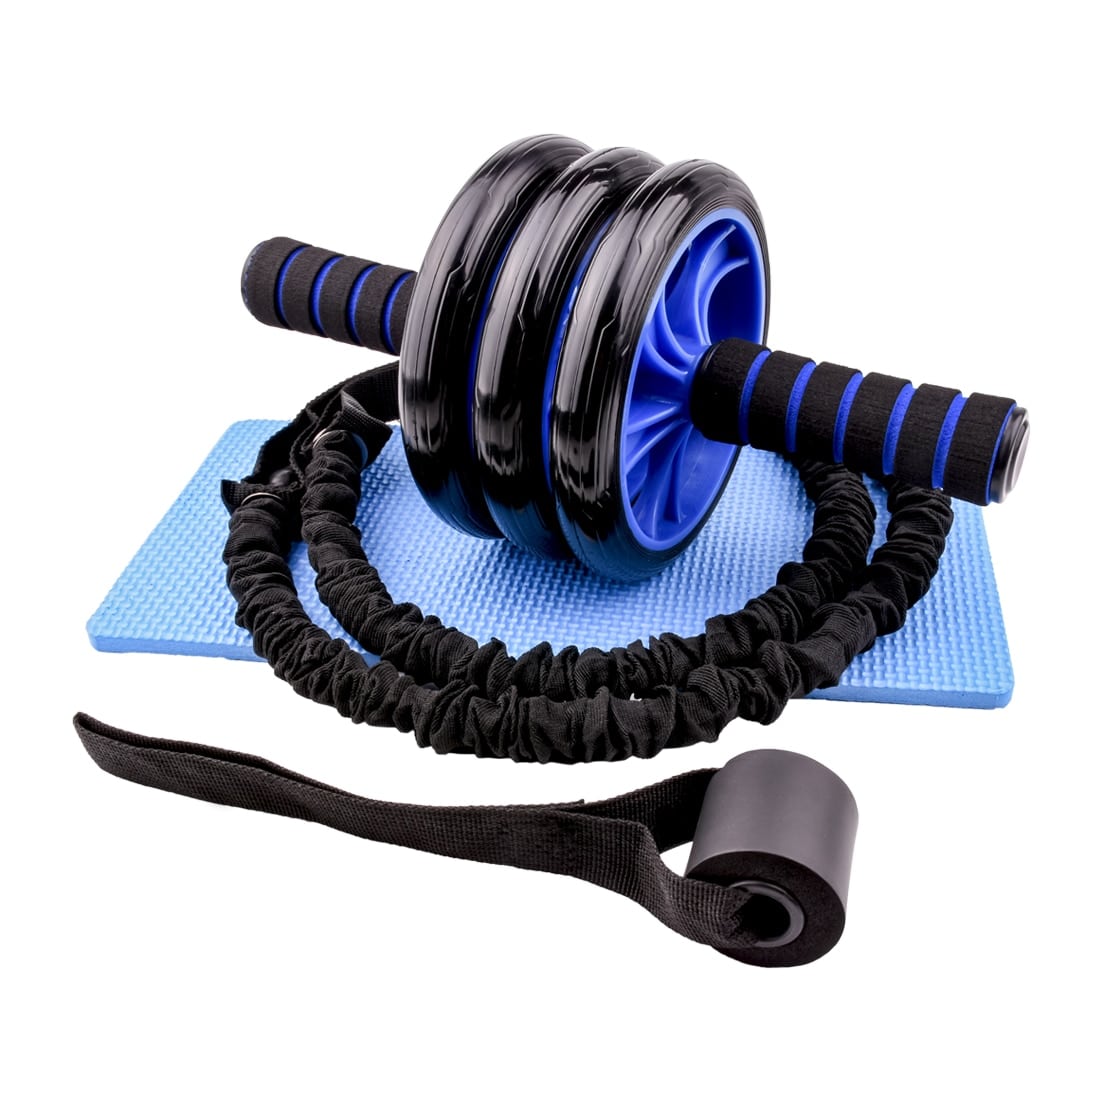 AB Wheels Roller with Resistance Band - Blue Force Sports